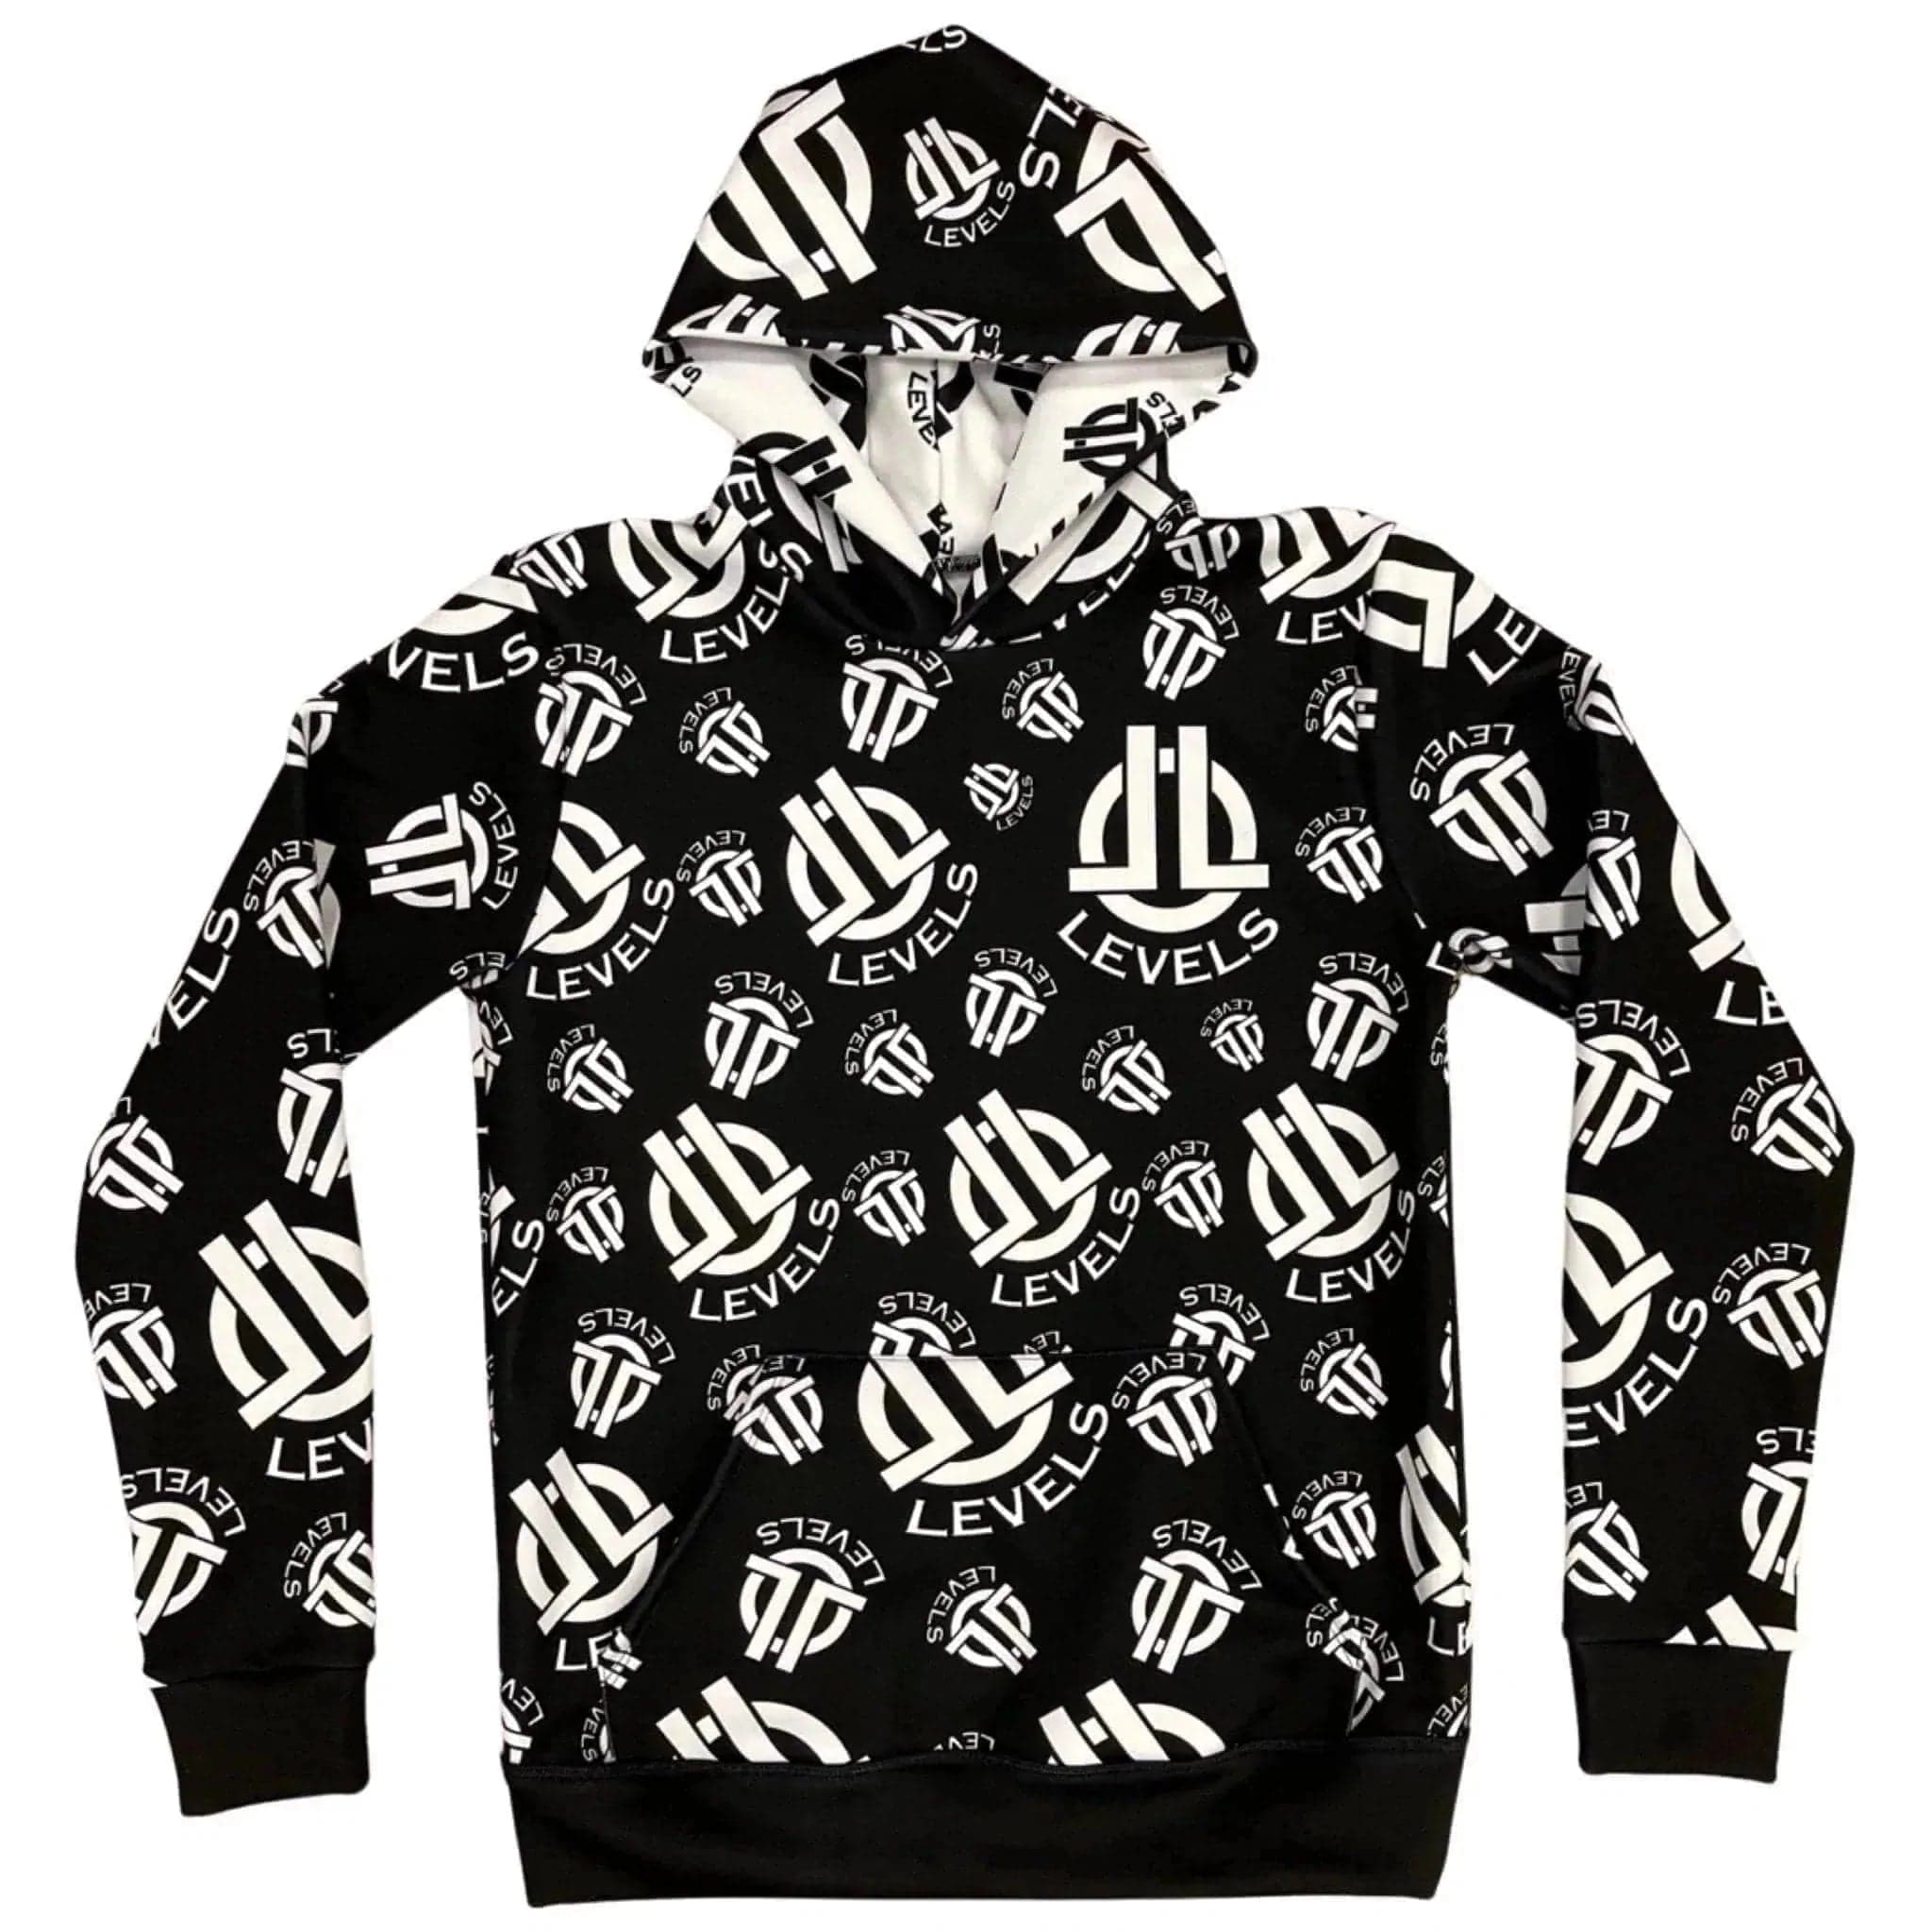 LEVELS, LLC hoodie Dye Sublimation HOODIE (BLACK AND WHITE)